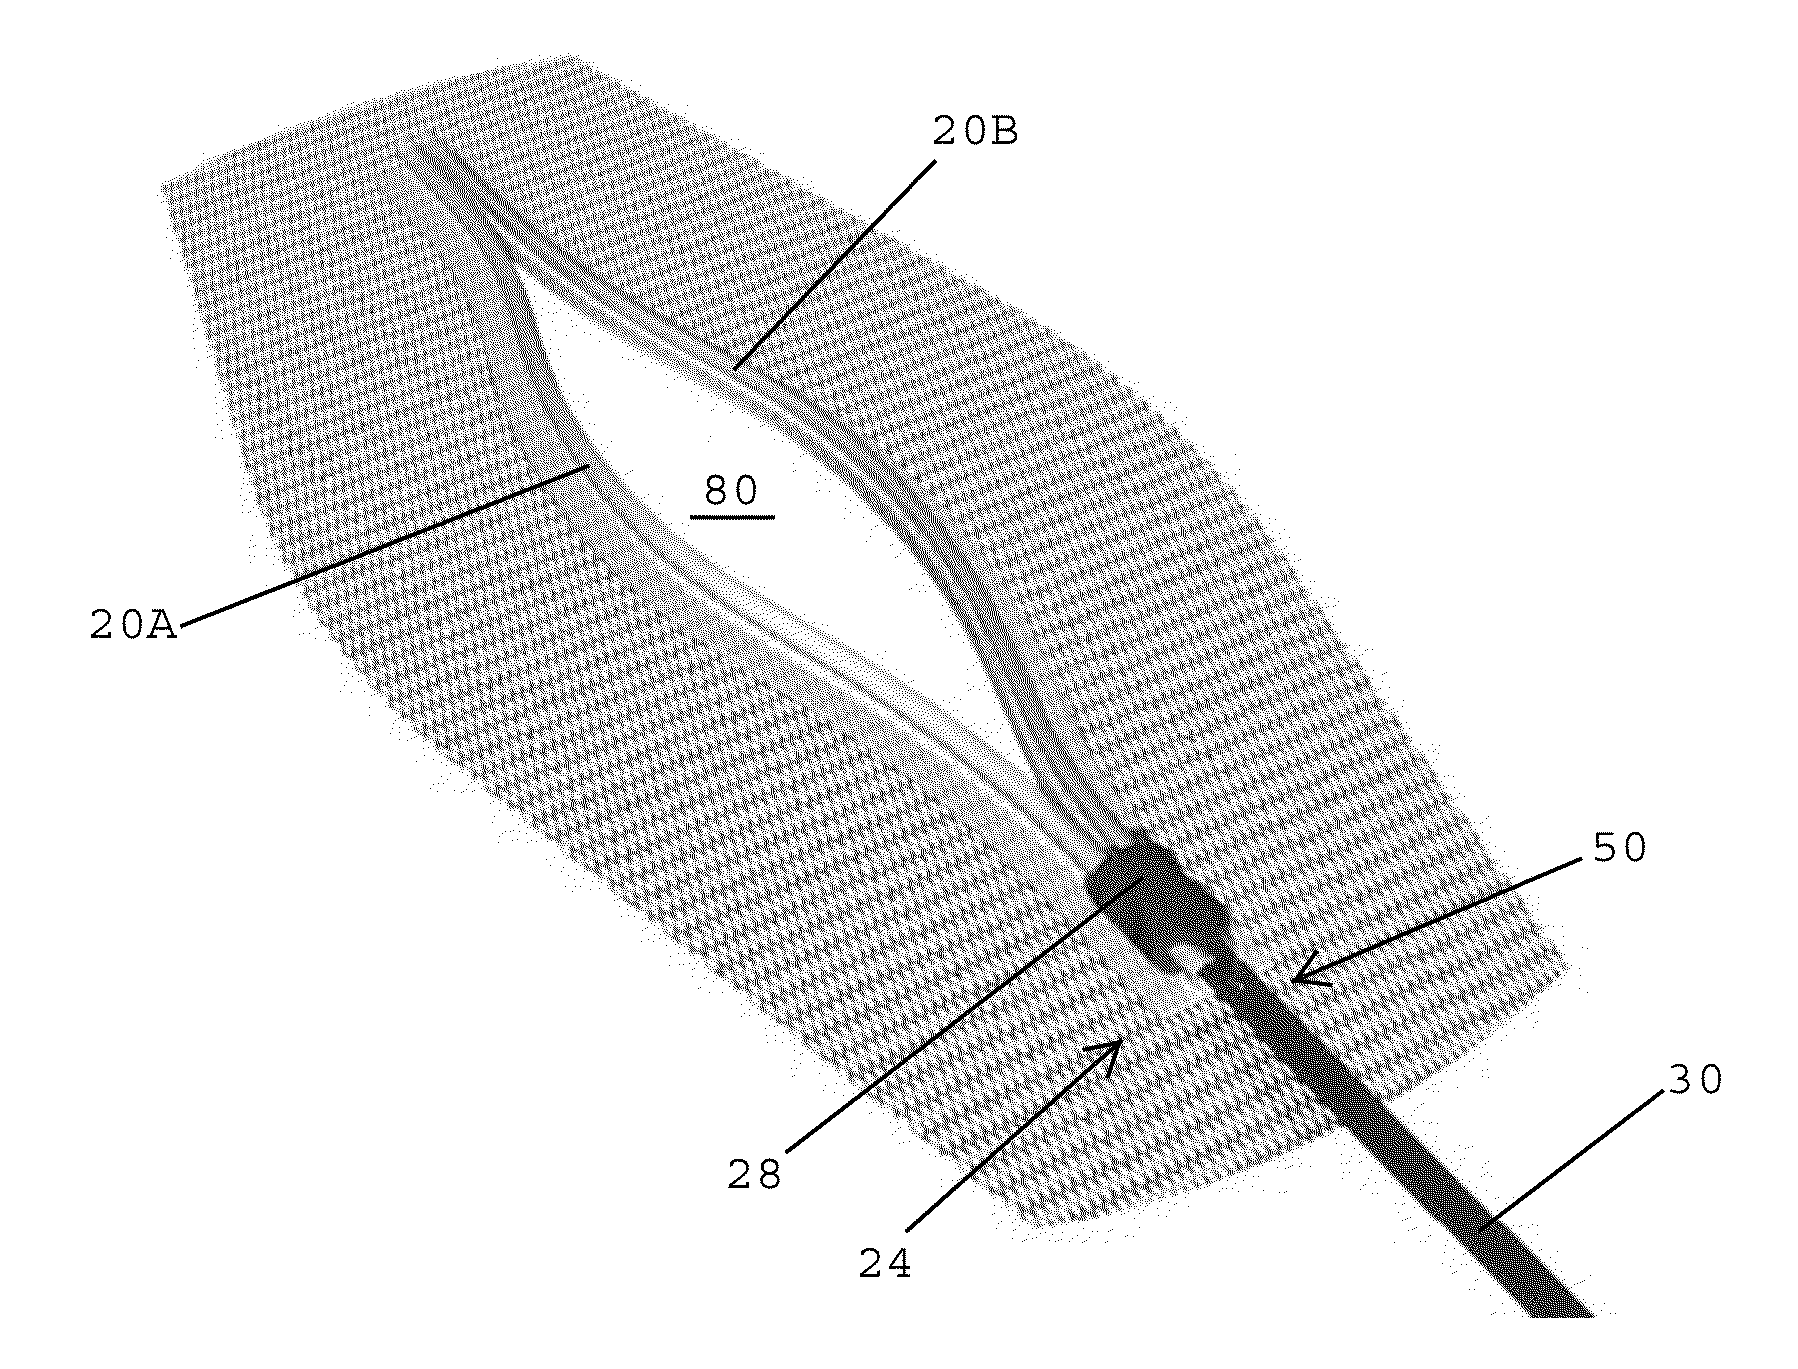 Incision guide and wound closure device and methods therefor